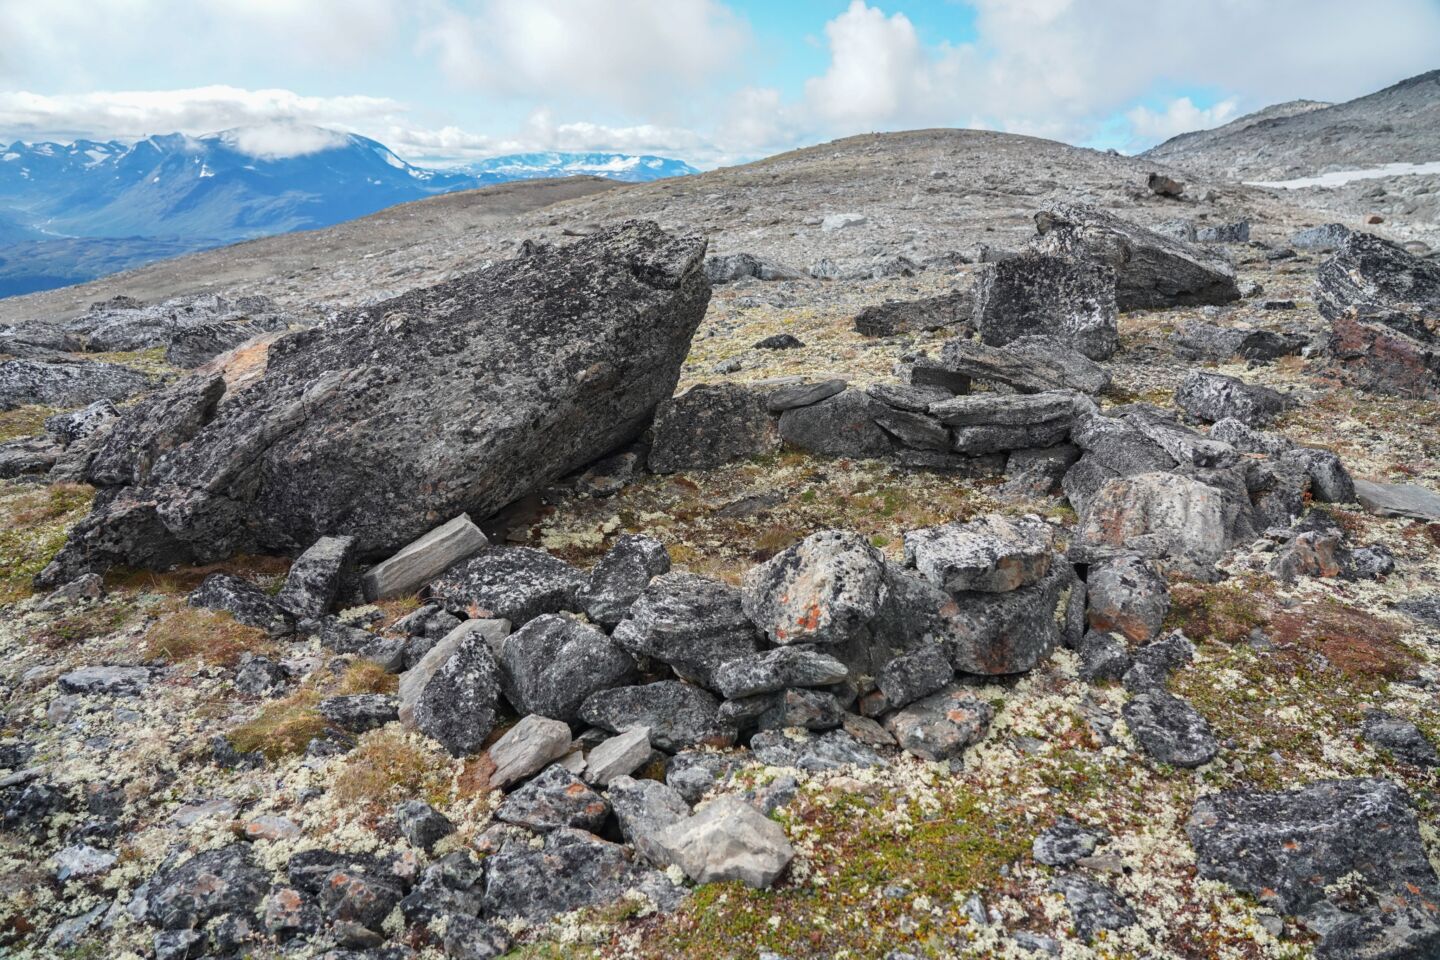 The ice melts on the Norwegian mountain to reveal a 1,500-year-old shoe and the mysteries it hides - Photo 10.